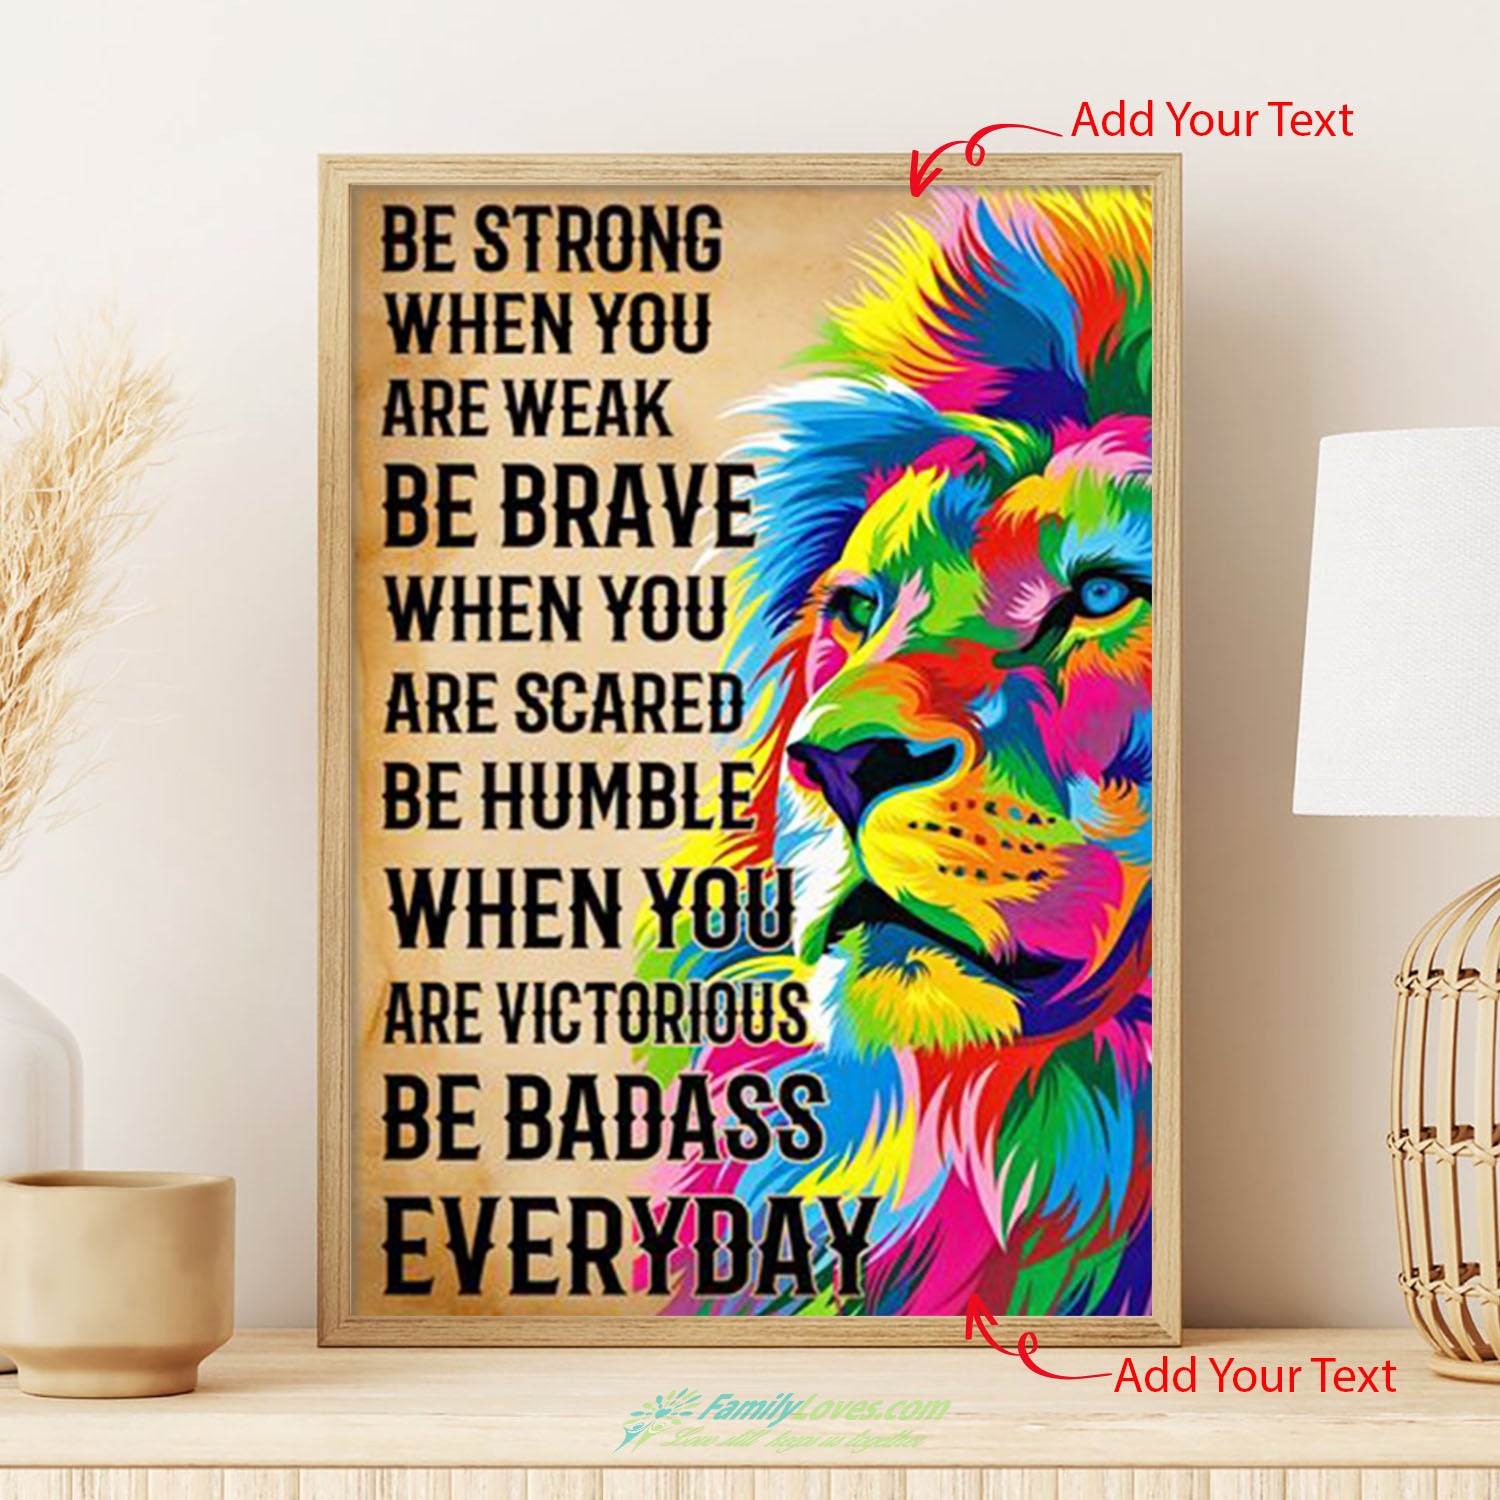 Be Strong When You Are Weak 1 Canvas For Painting White Poster Board All Size 1